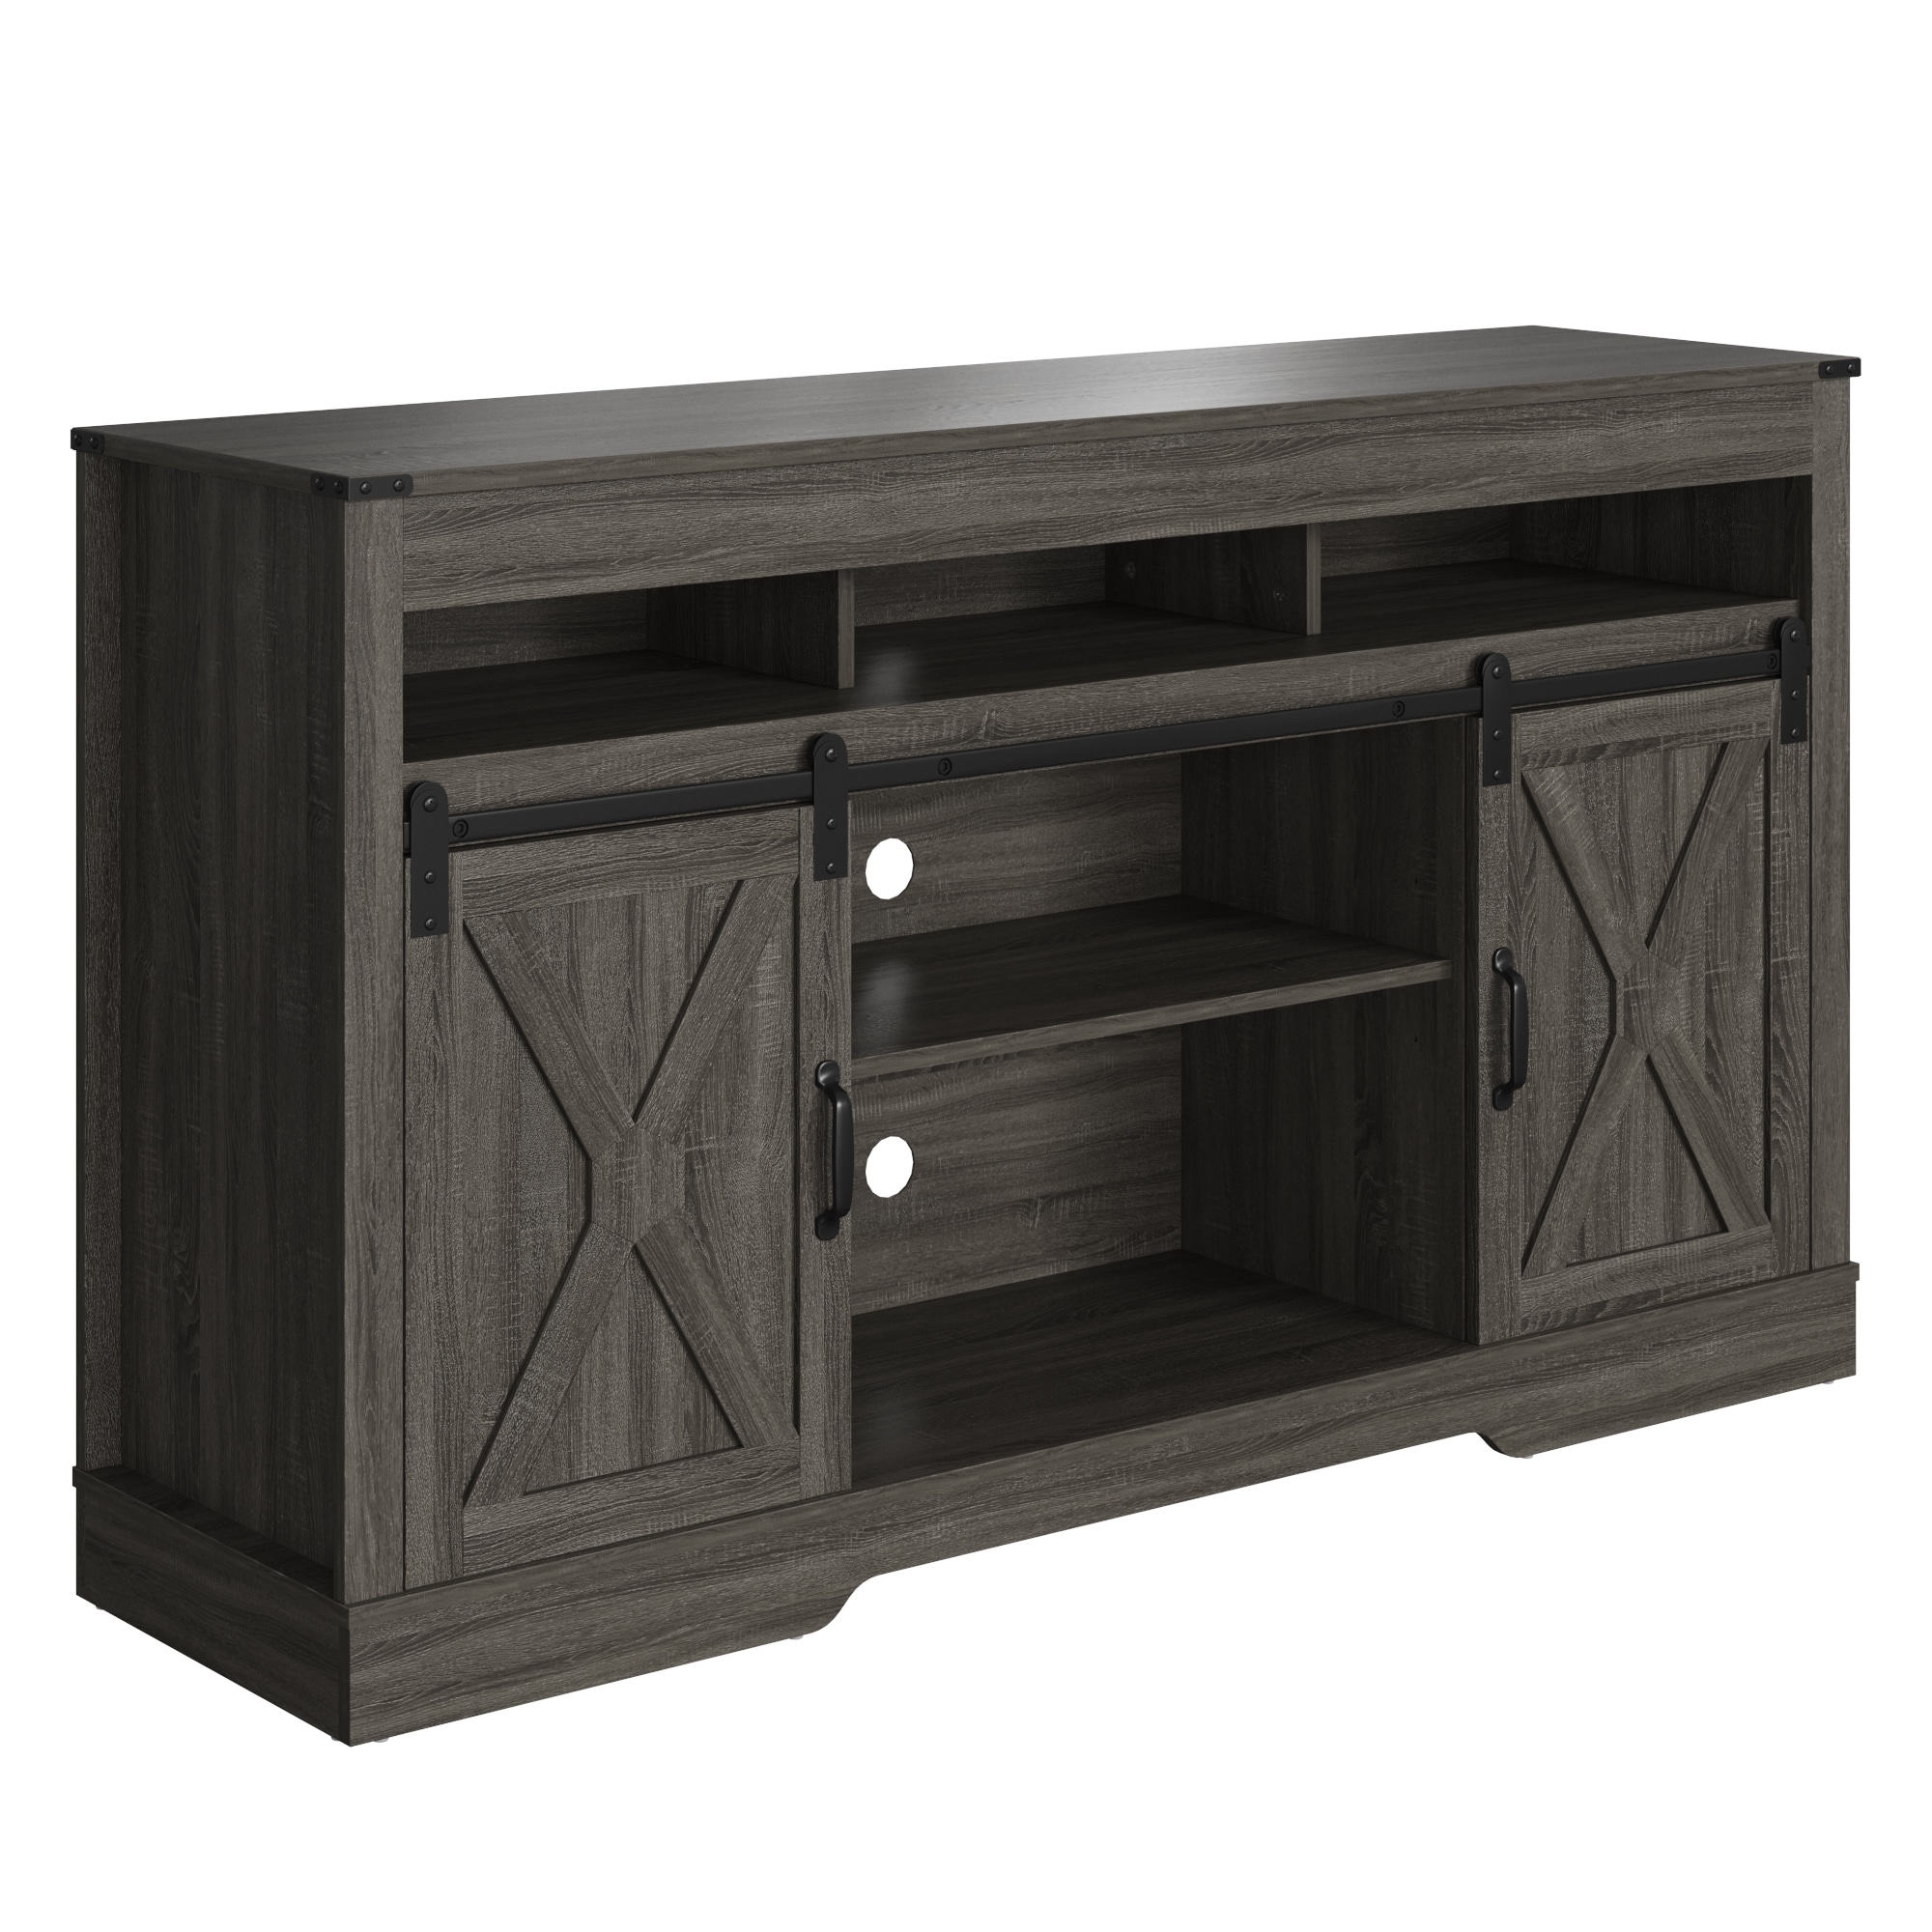 Country Style Design Tv Stand Entertainment Center Tv Cabinet